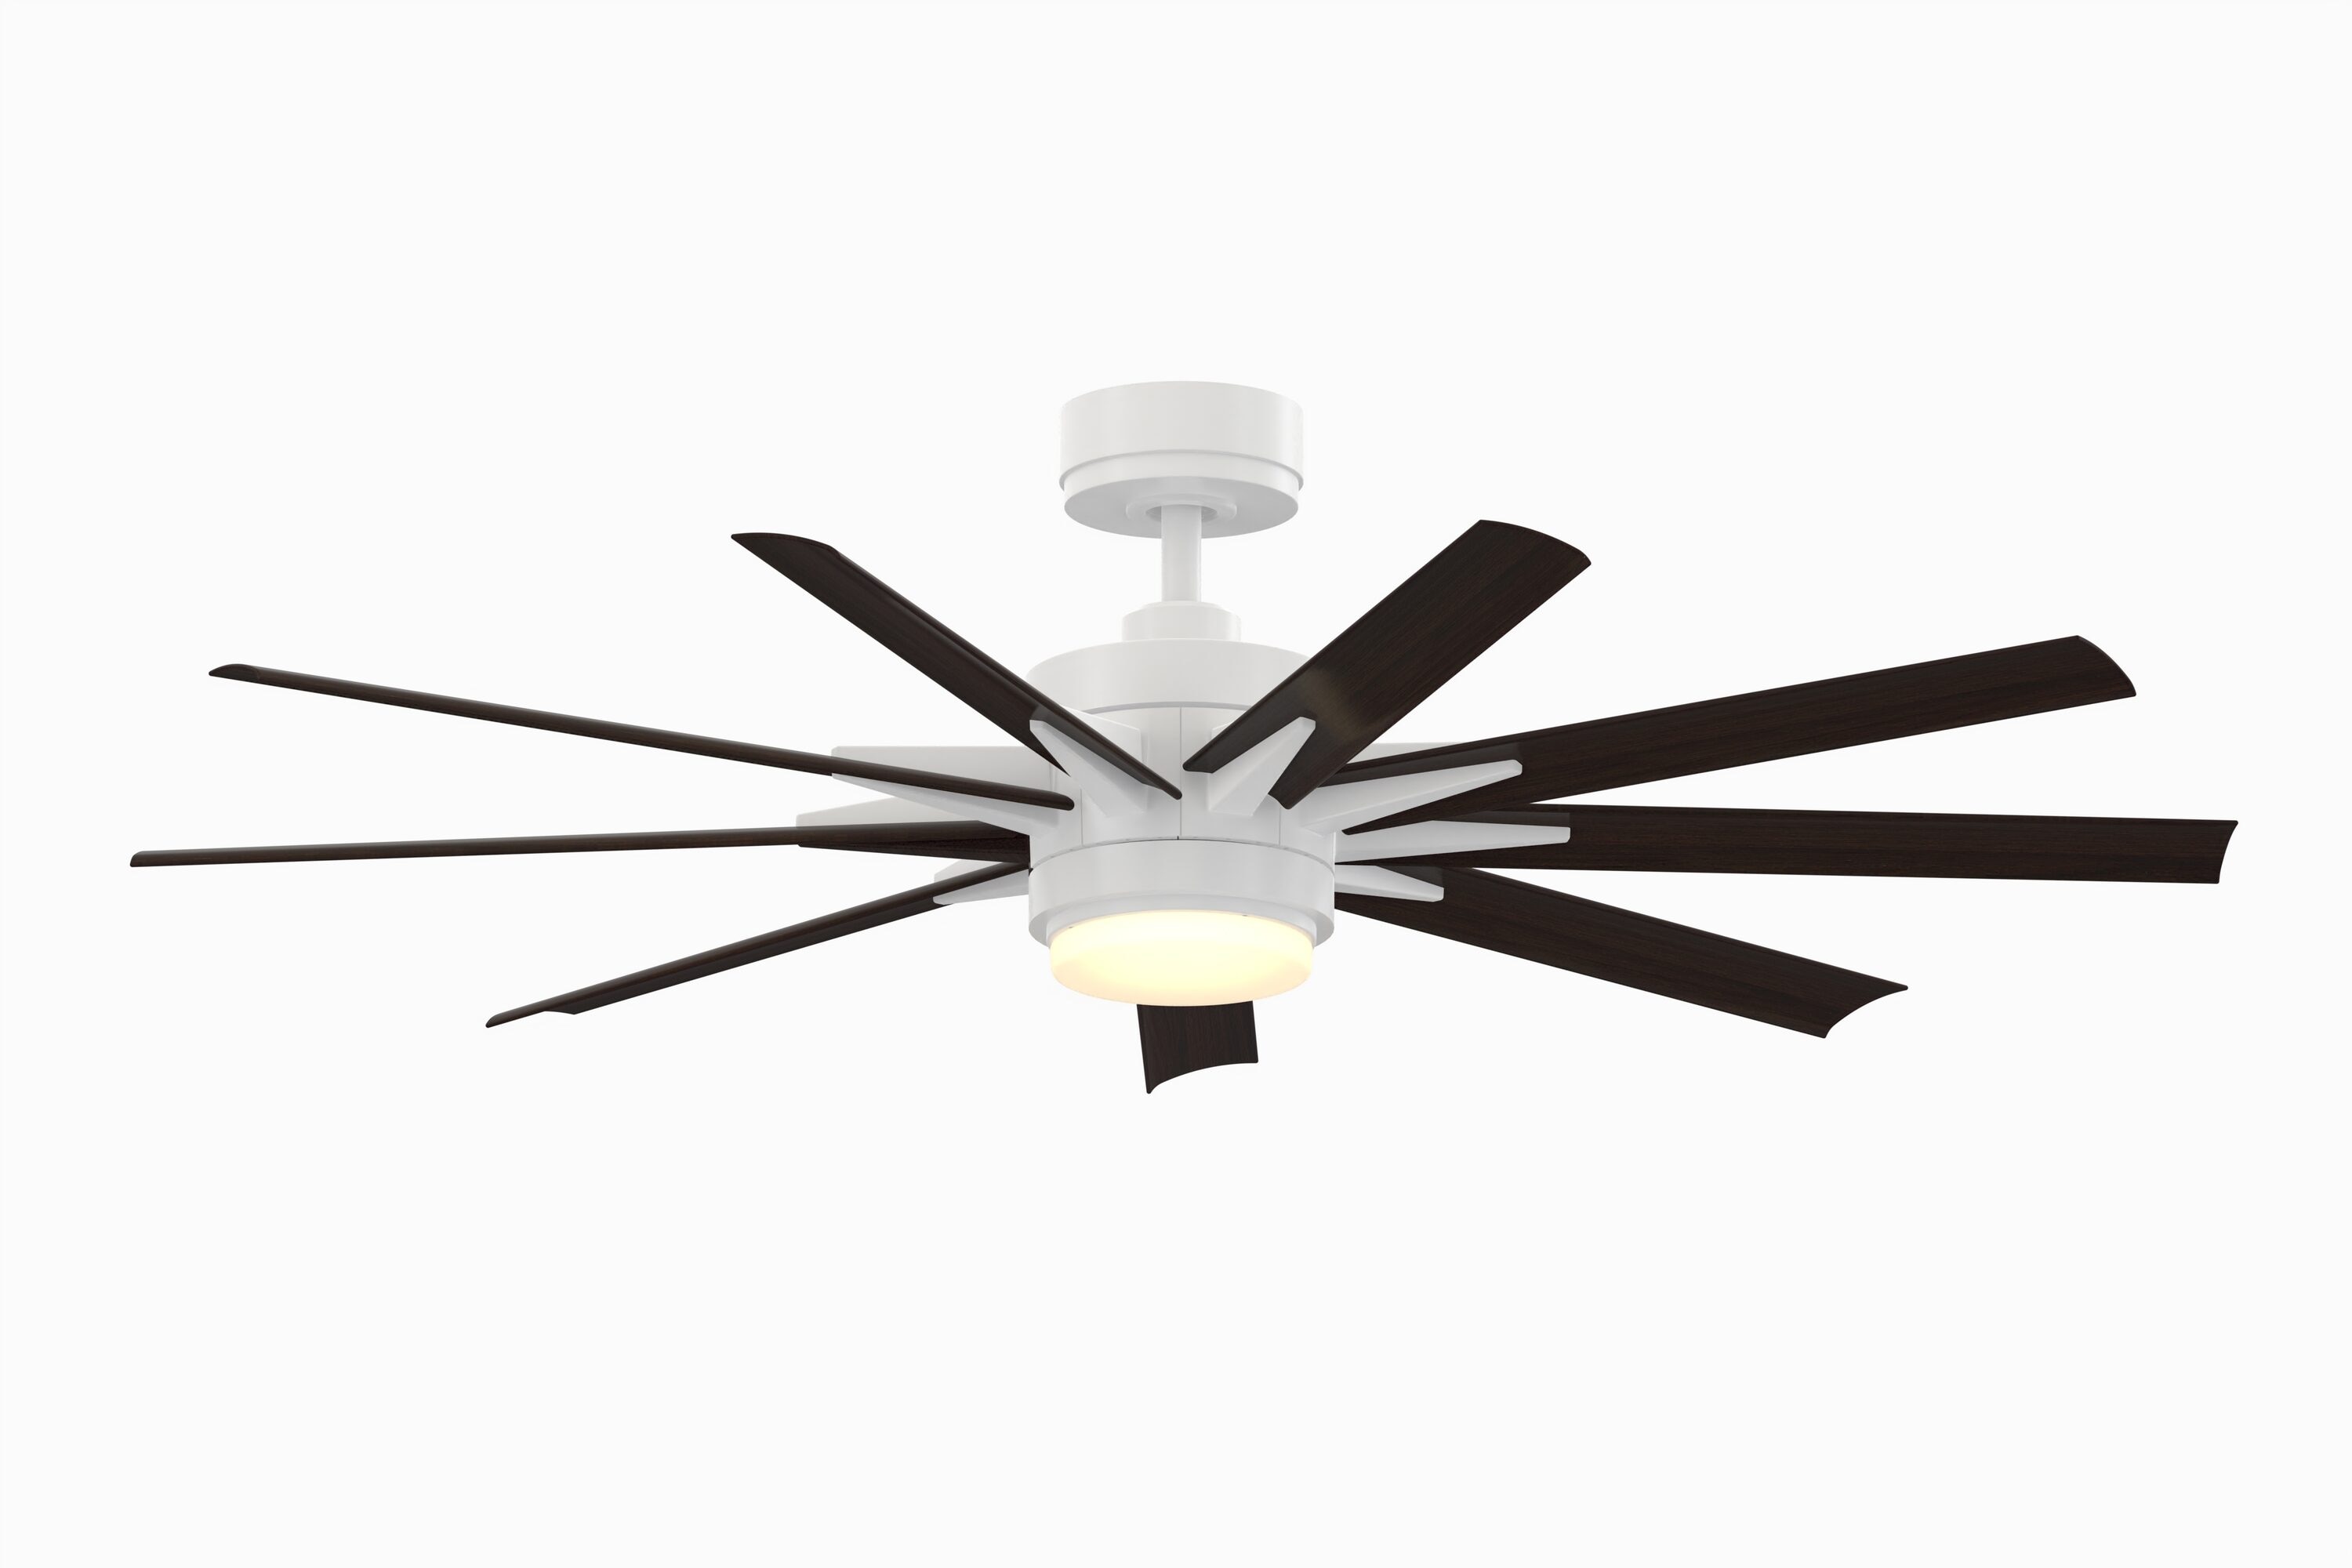 Odyn Custom 56-in Matte White Color-changing LED Indoor/Outdoor Smart Ceiling Fan with Light Remote (9-Blade) Walnut | - Fanimation FPD8152MWW-56DWAW